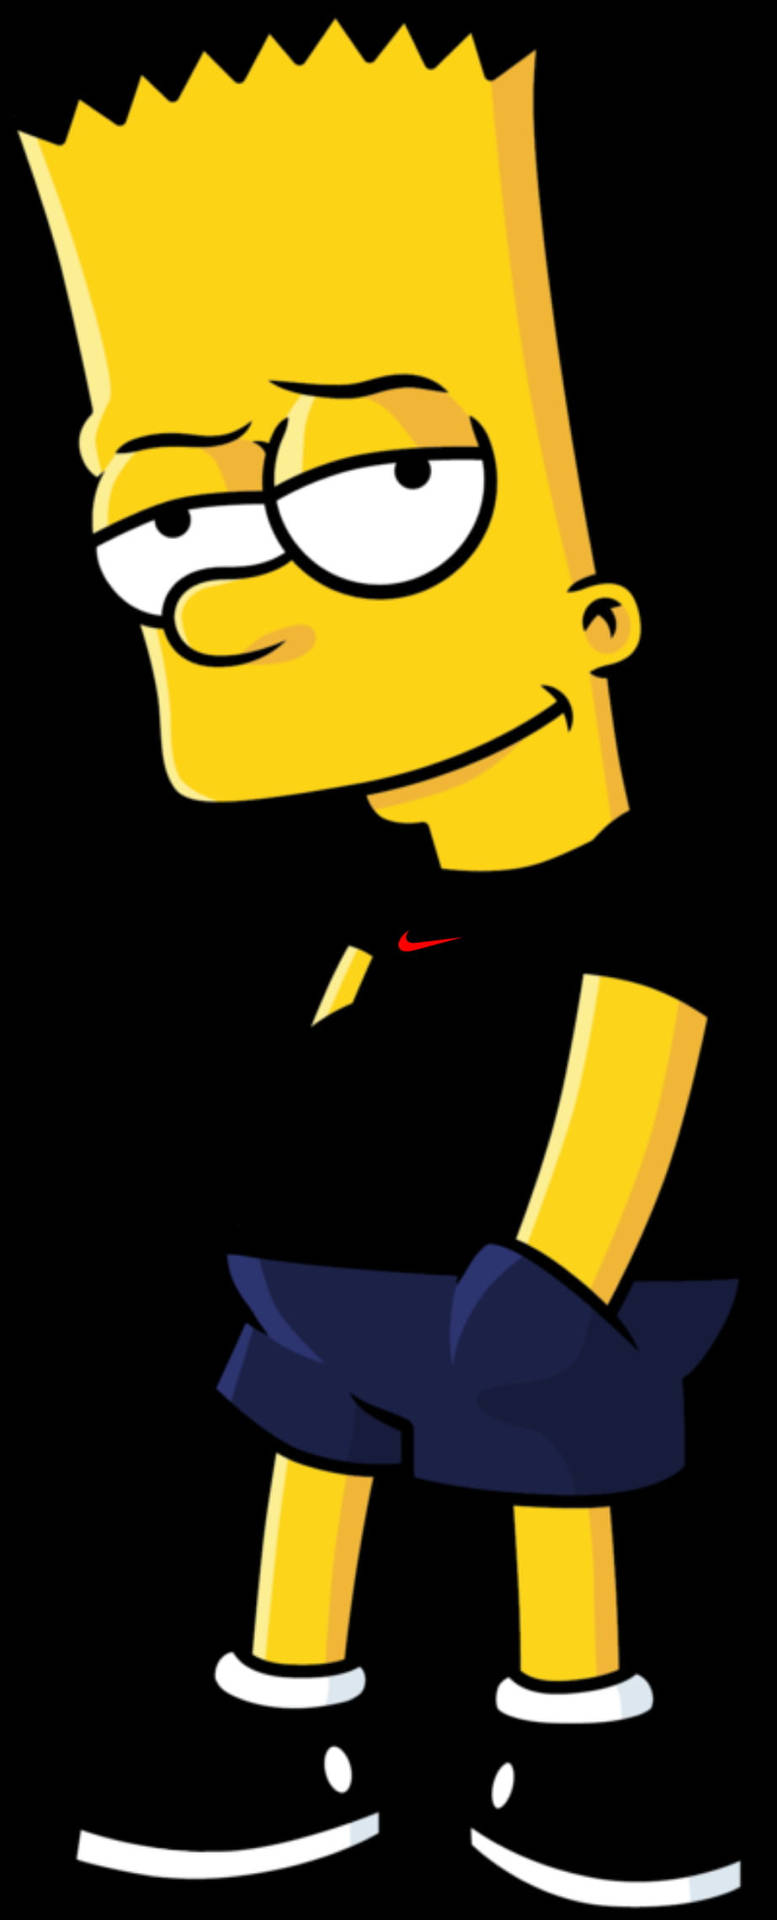 Cool Bart Simpson With Black Shirt Background